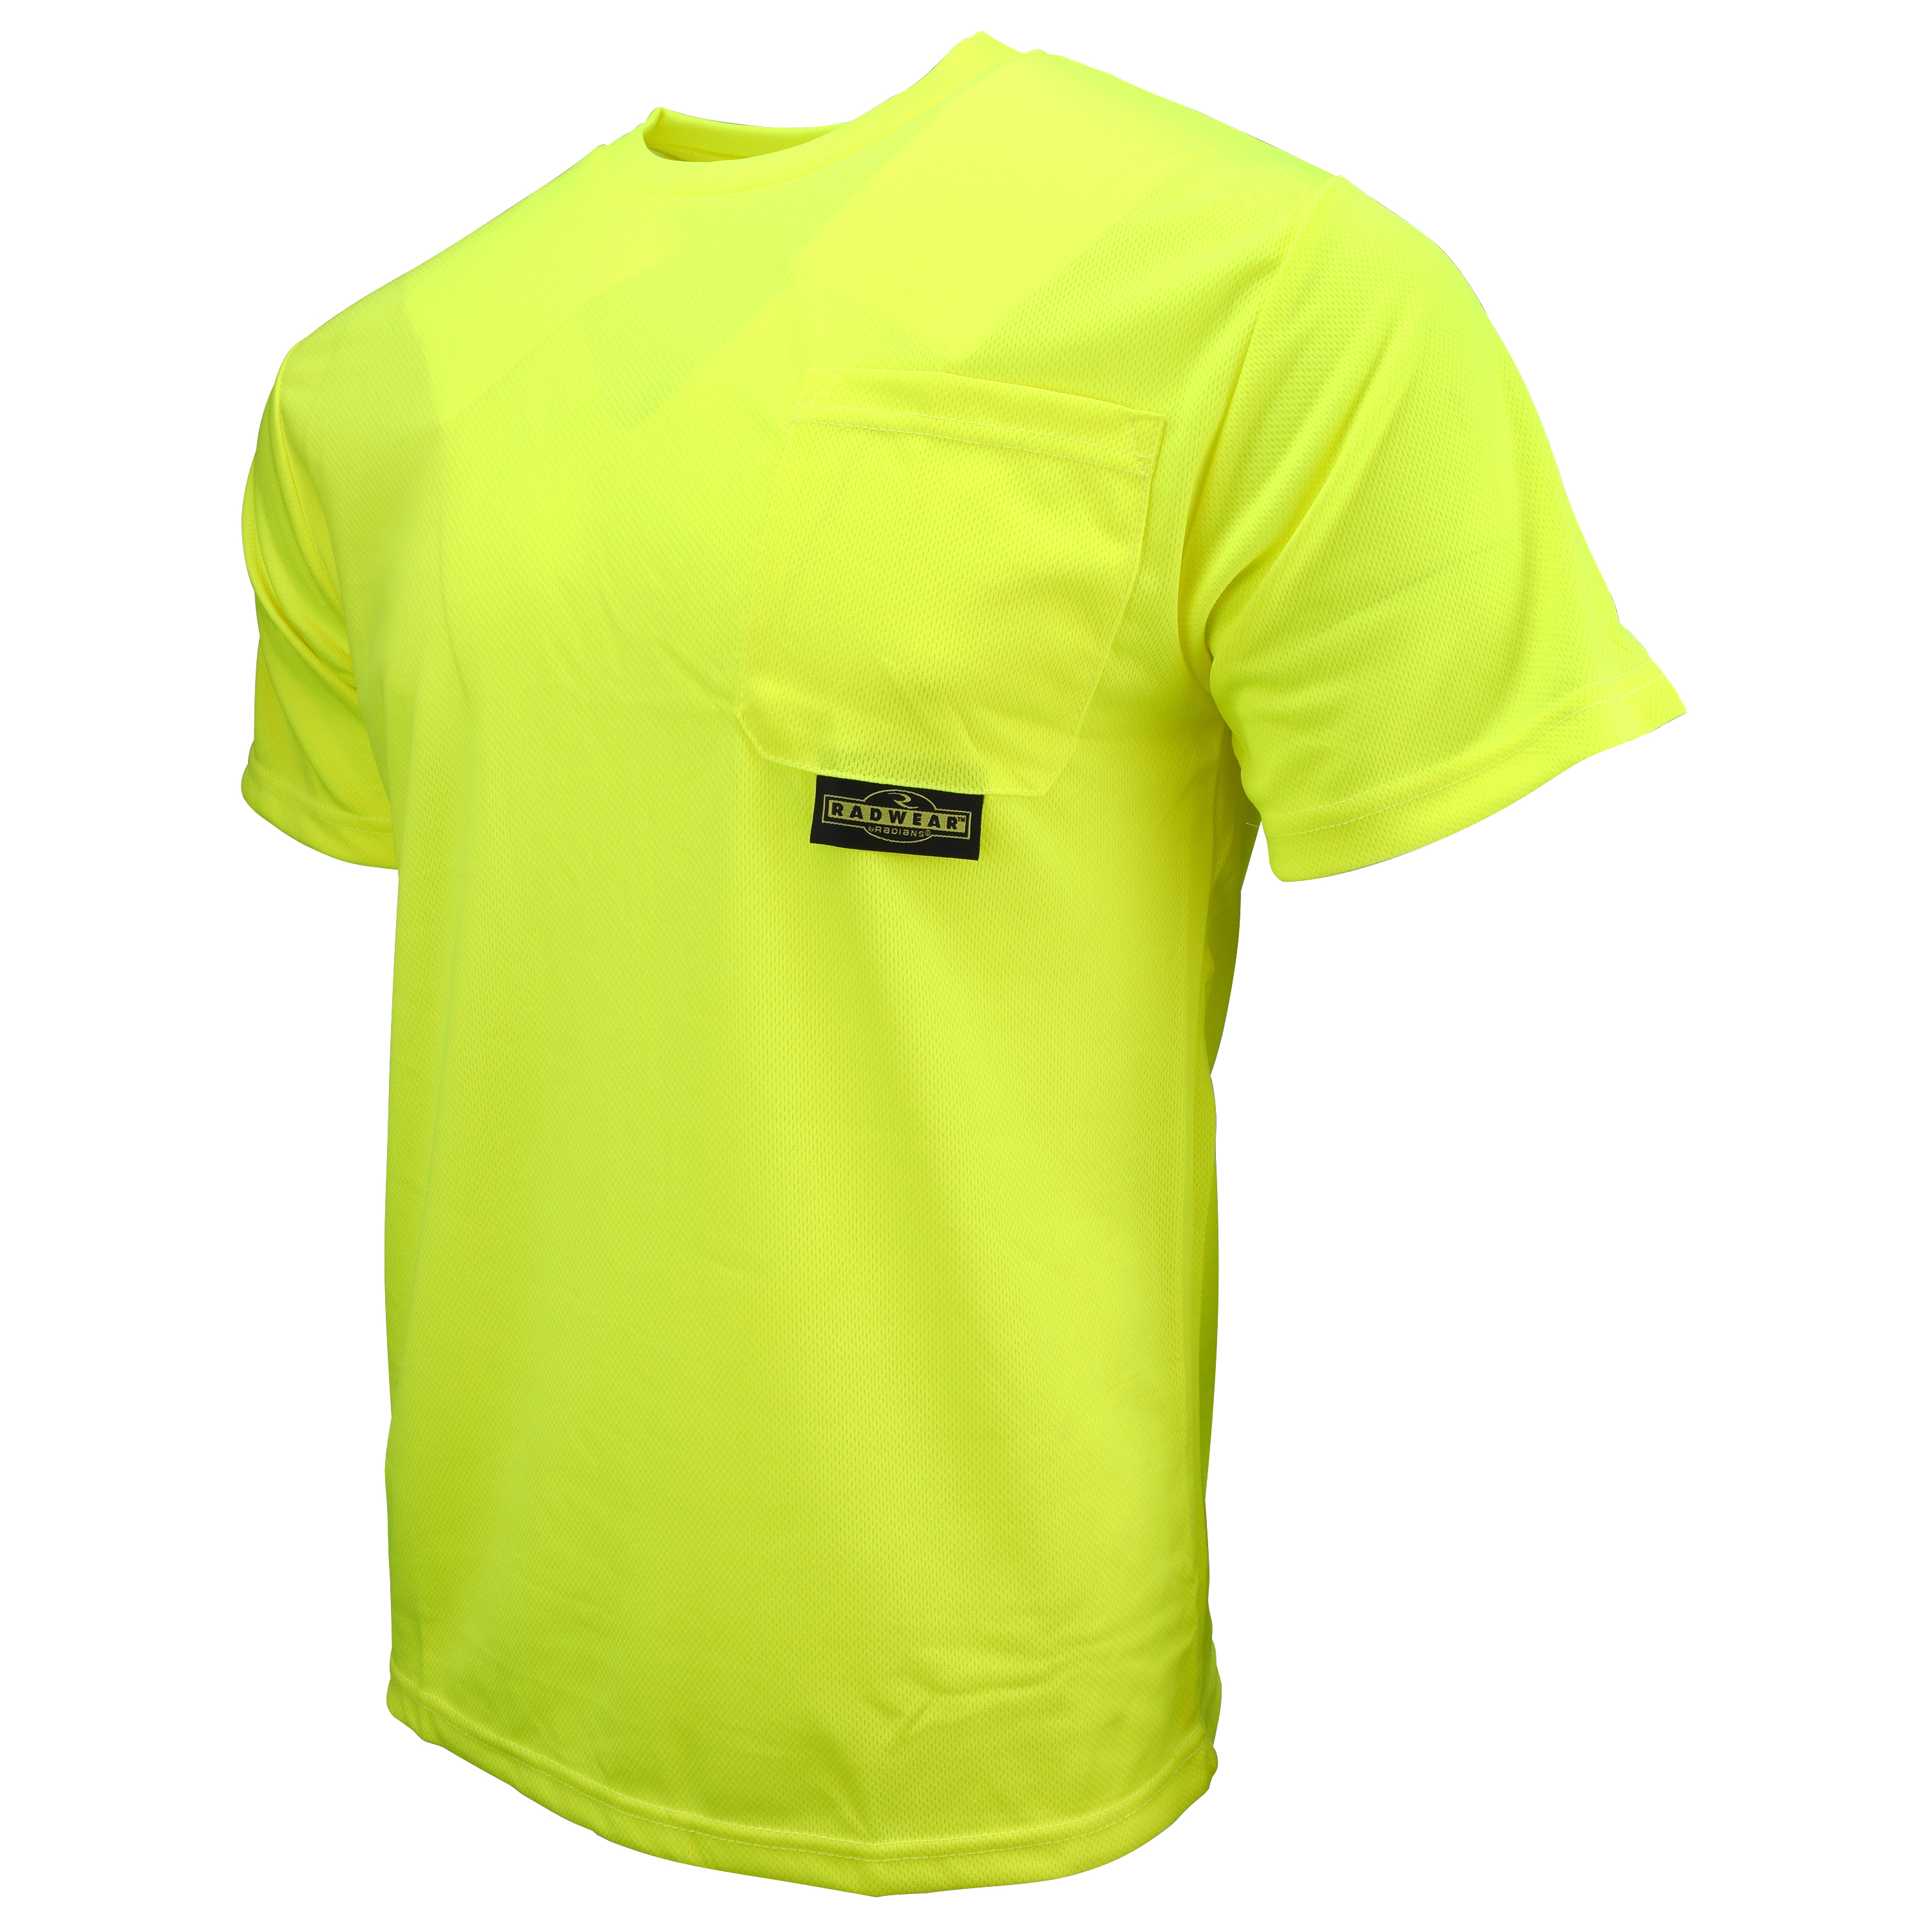 ST11-N Non-Rated Short Sleeve Safety T-Shirt with Max-Dri™ - Green - Size XL